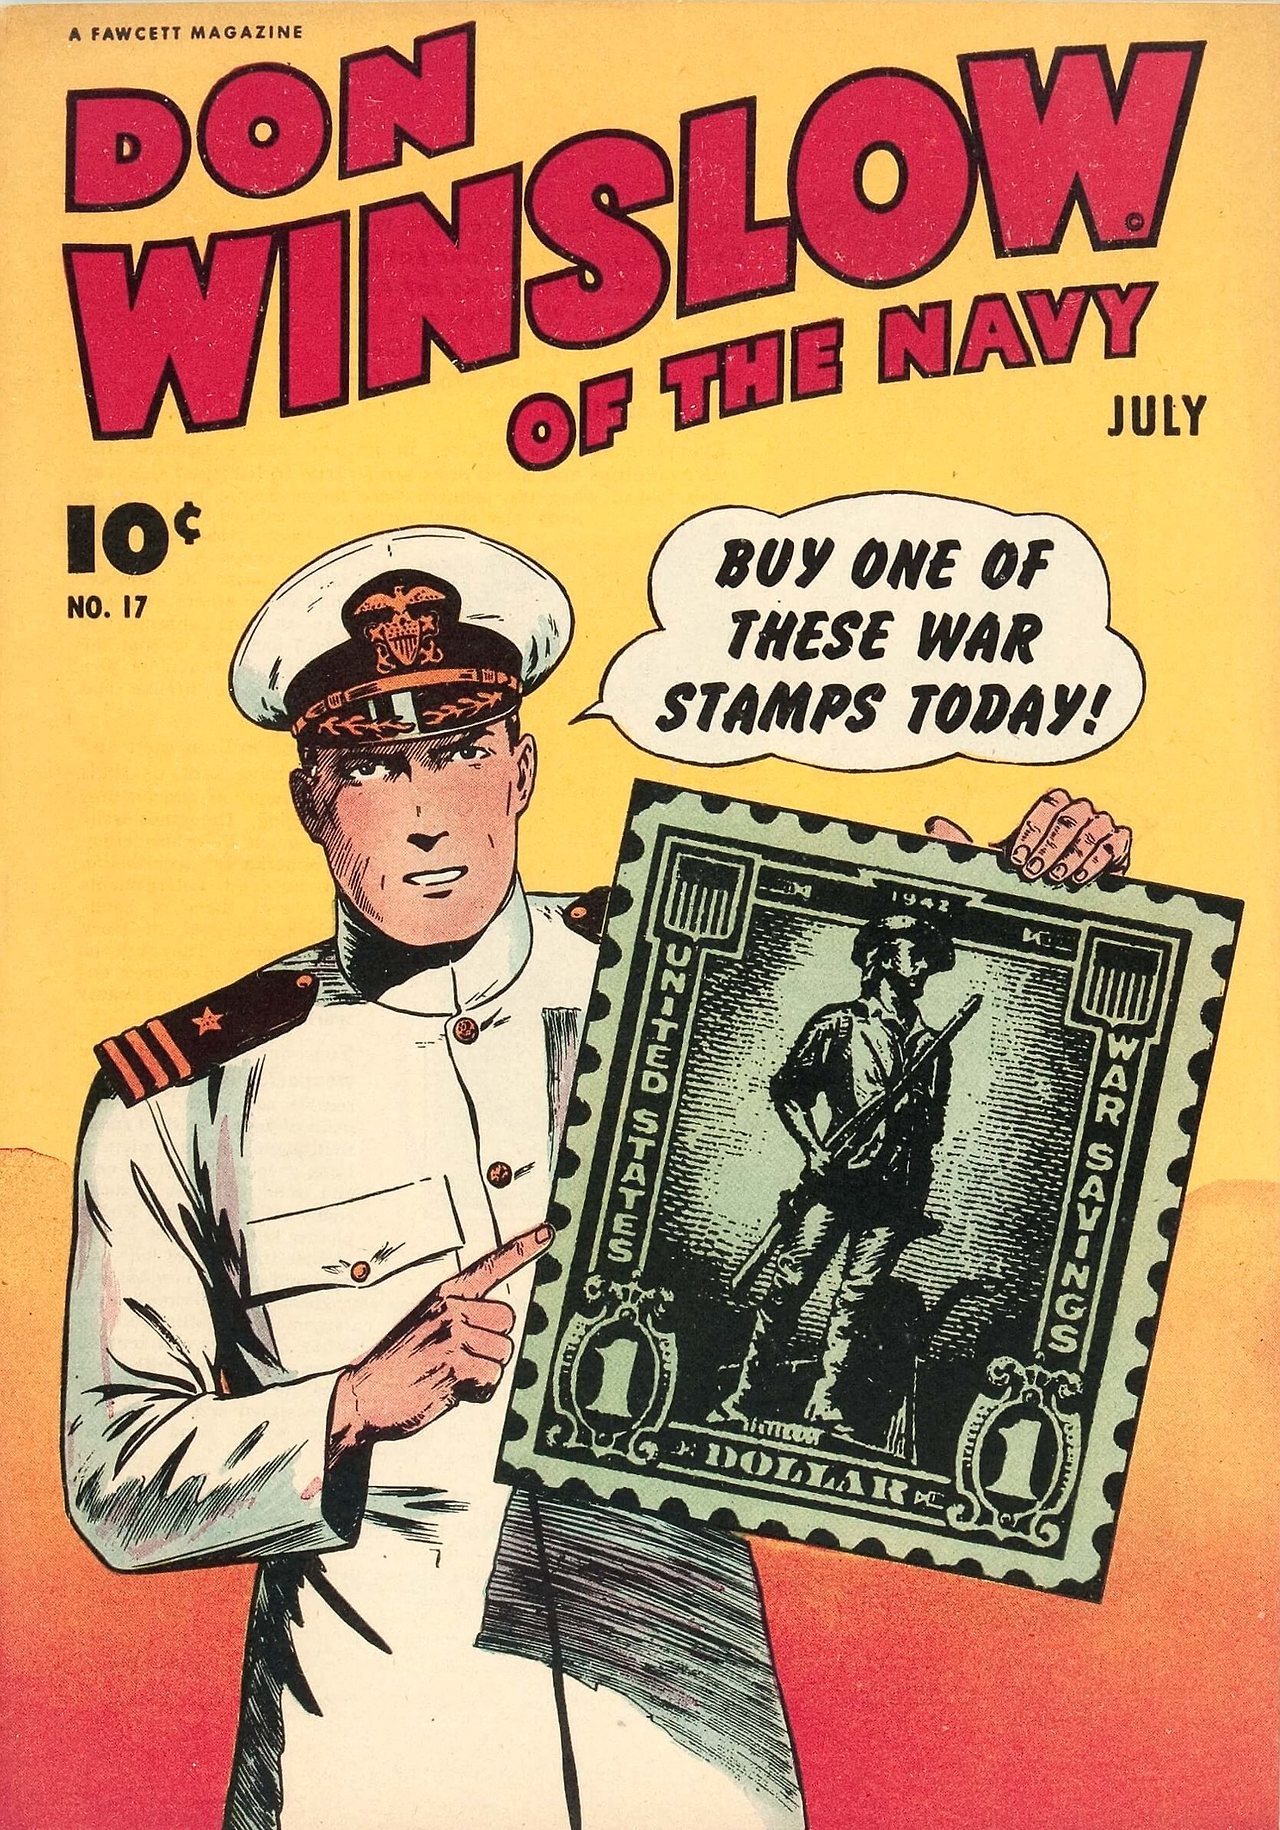 Don Winslow of the Navy - issue No. 17 - Fawcett Publications - 1944